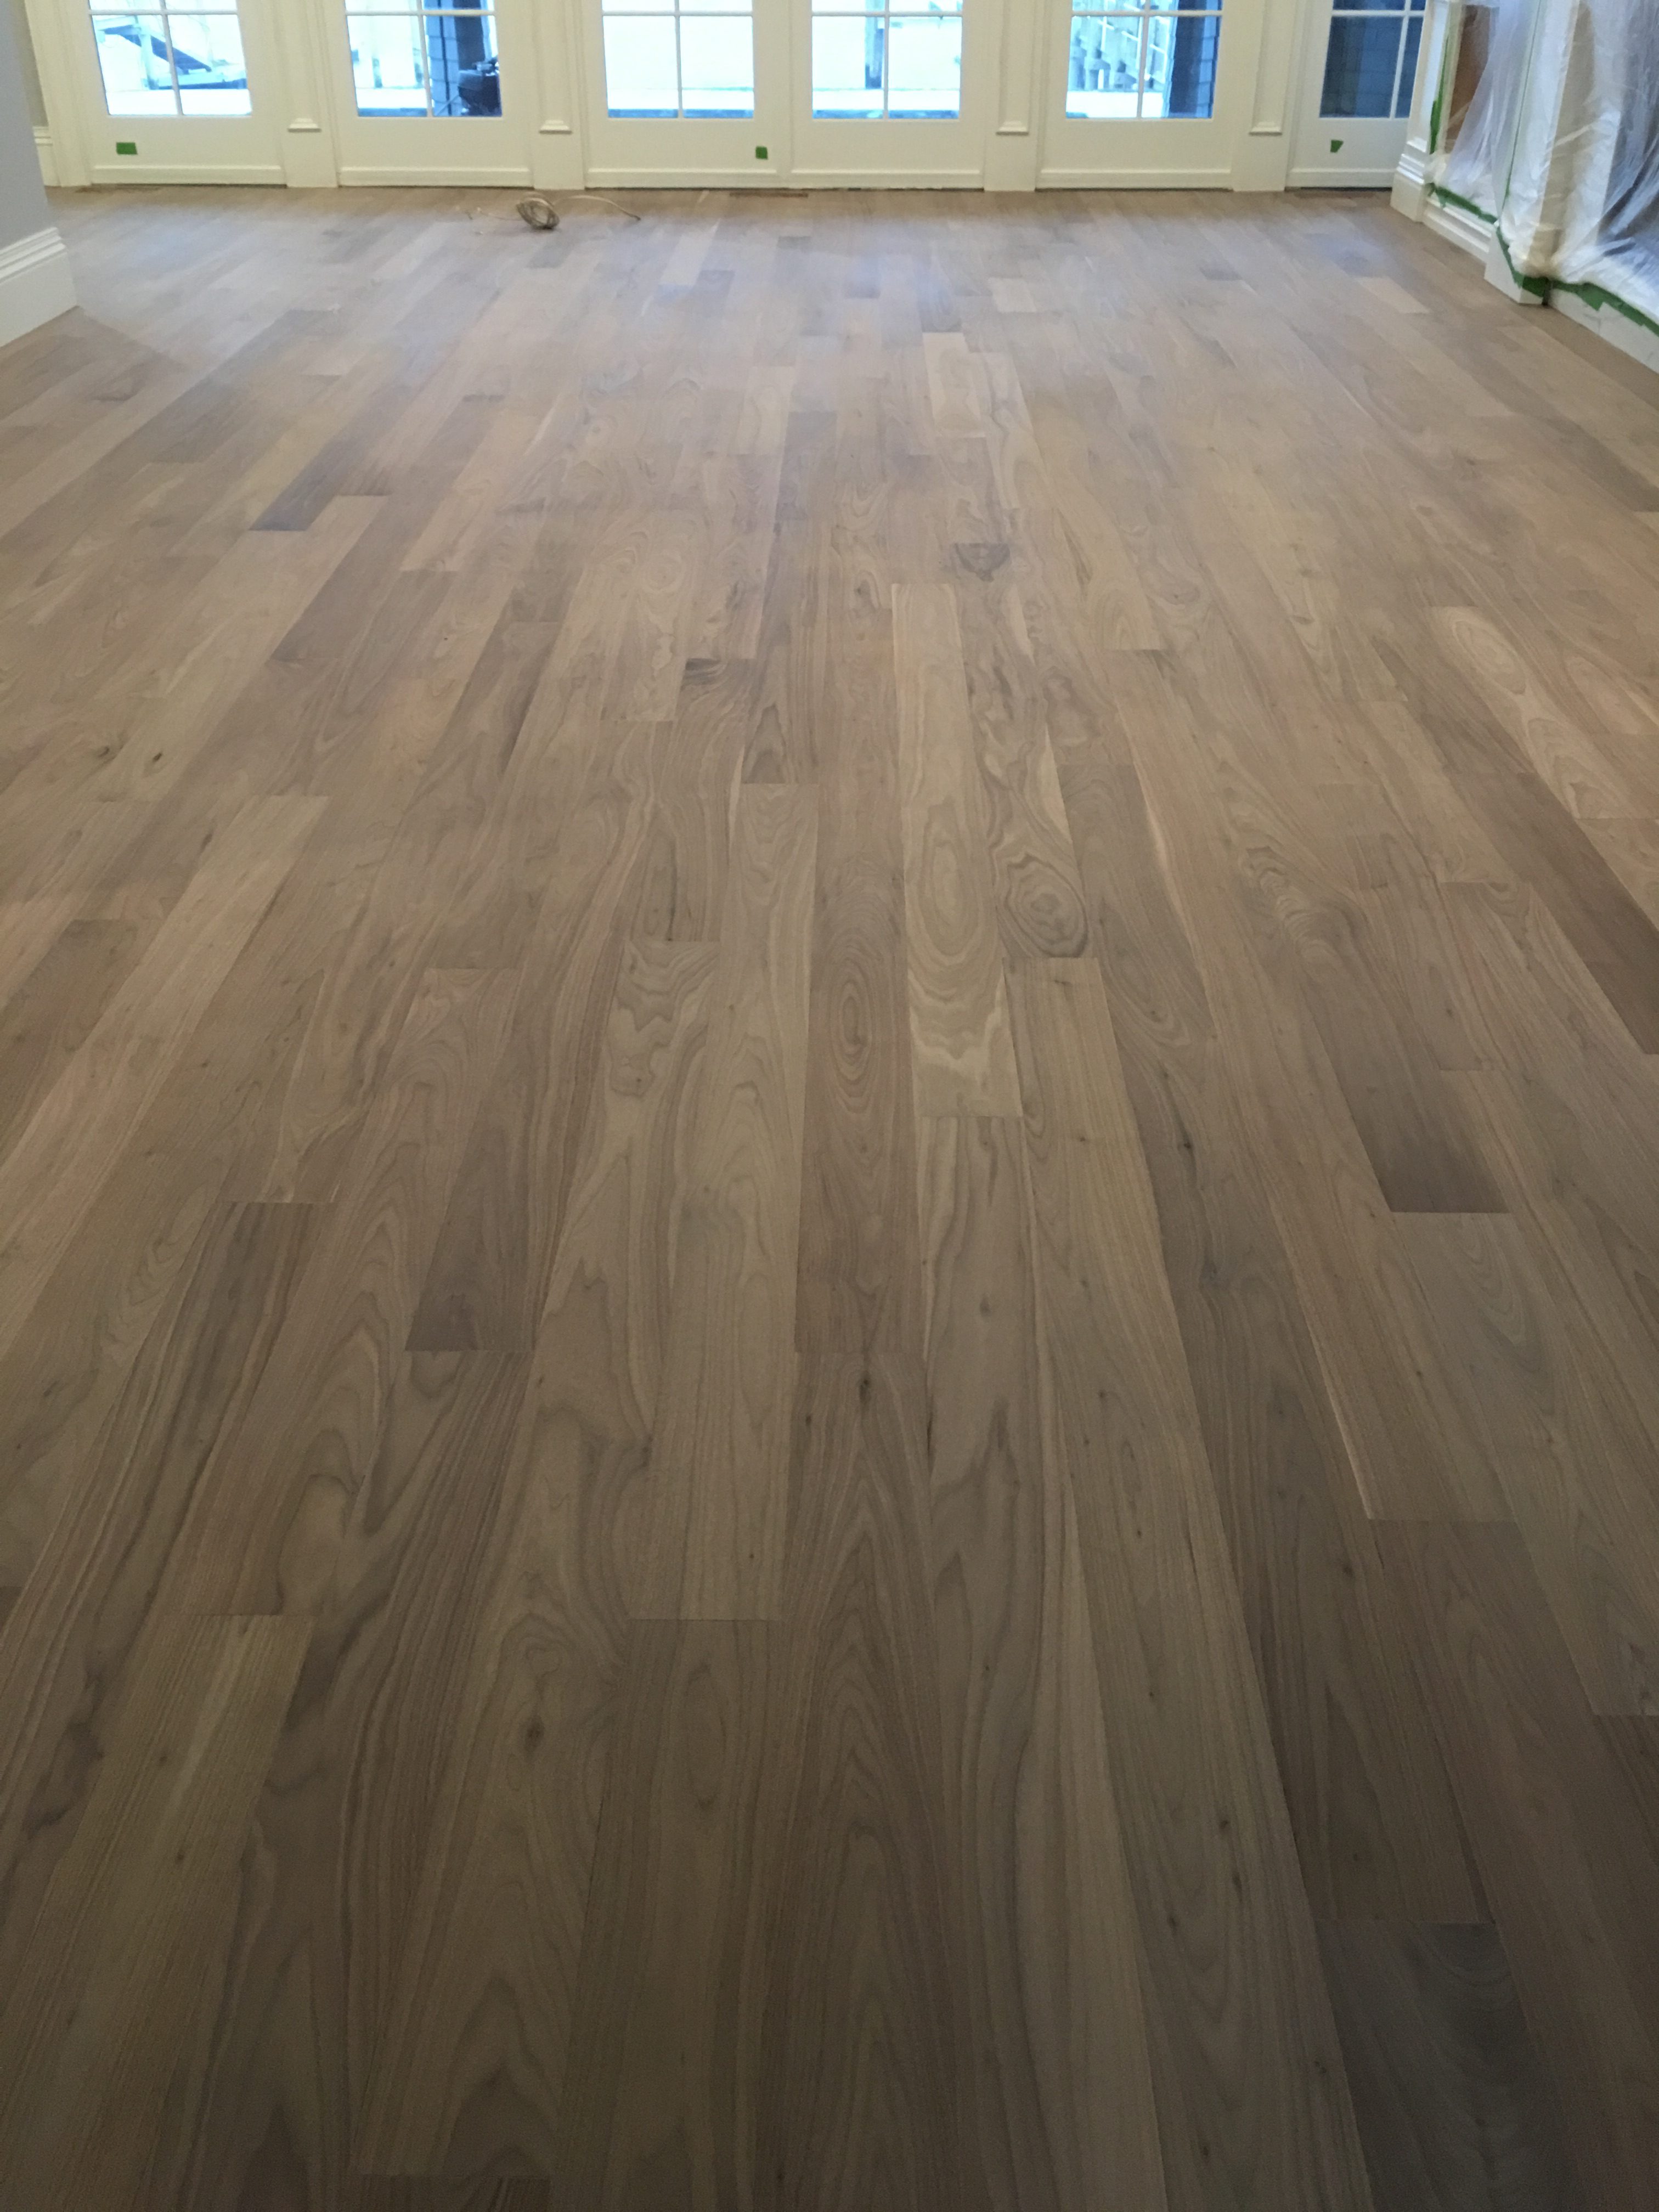 High quality wood flooring in New Jersey